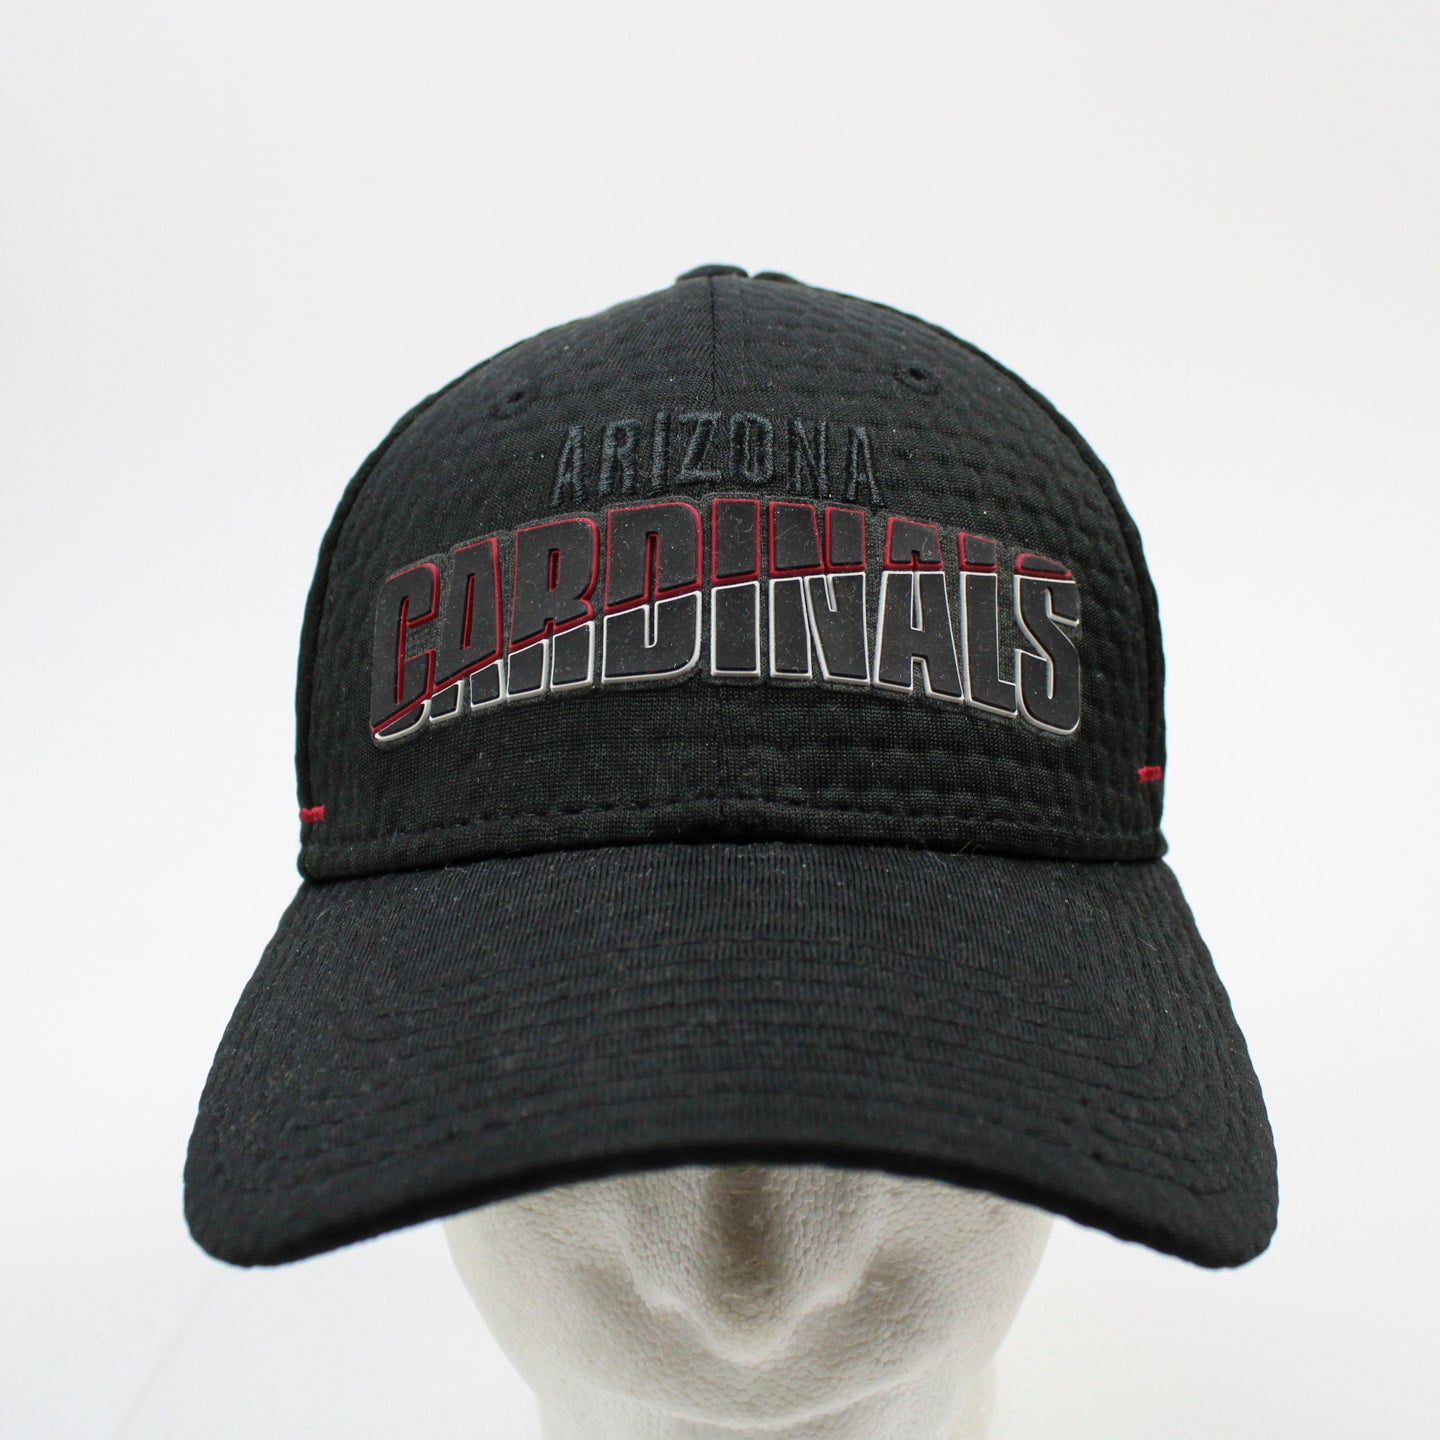 Louisville Cardinals adidas Fitted Hat Unisex Red/Black New SM/MD - Locker  Room Direct